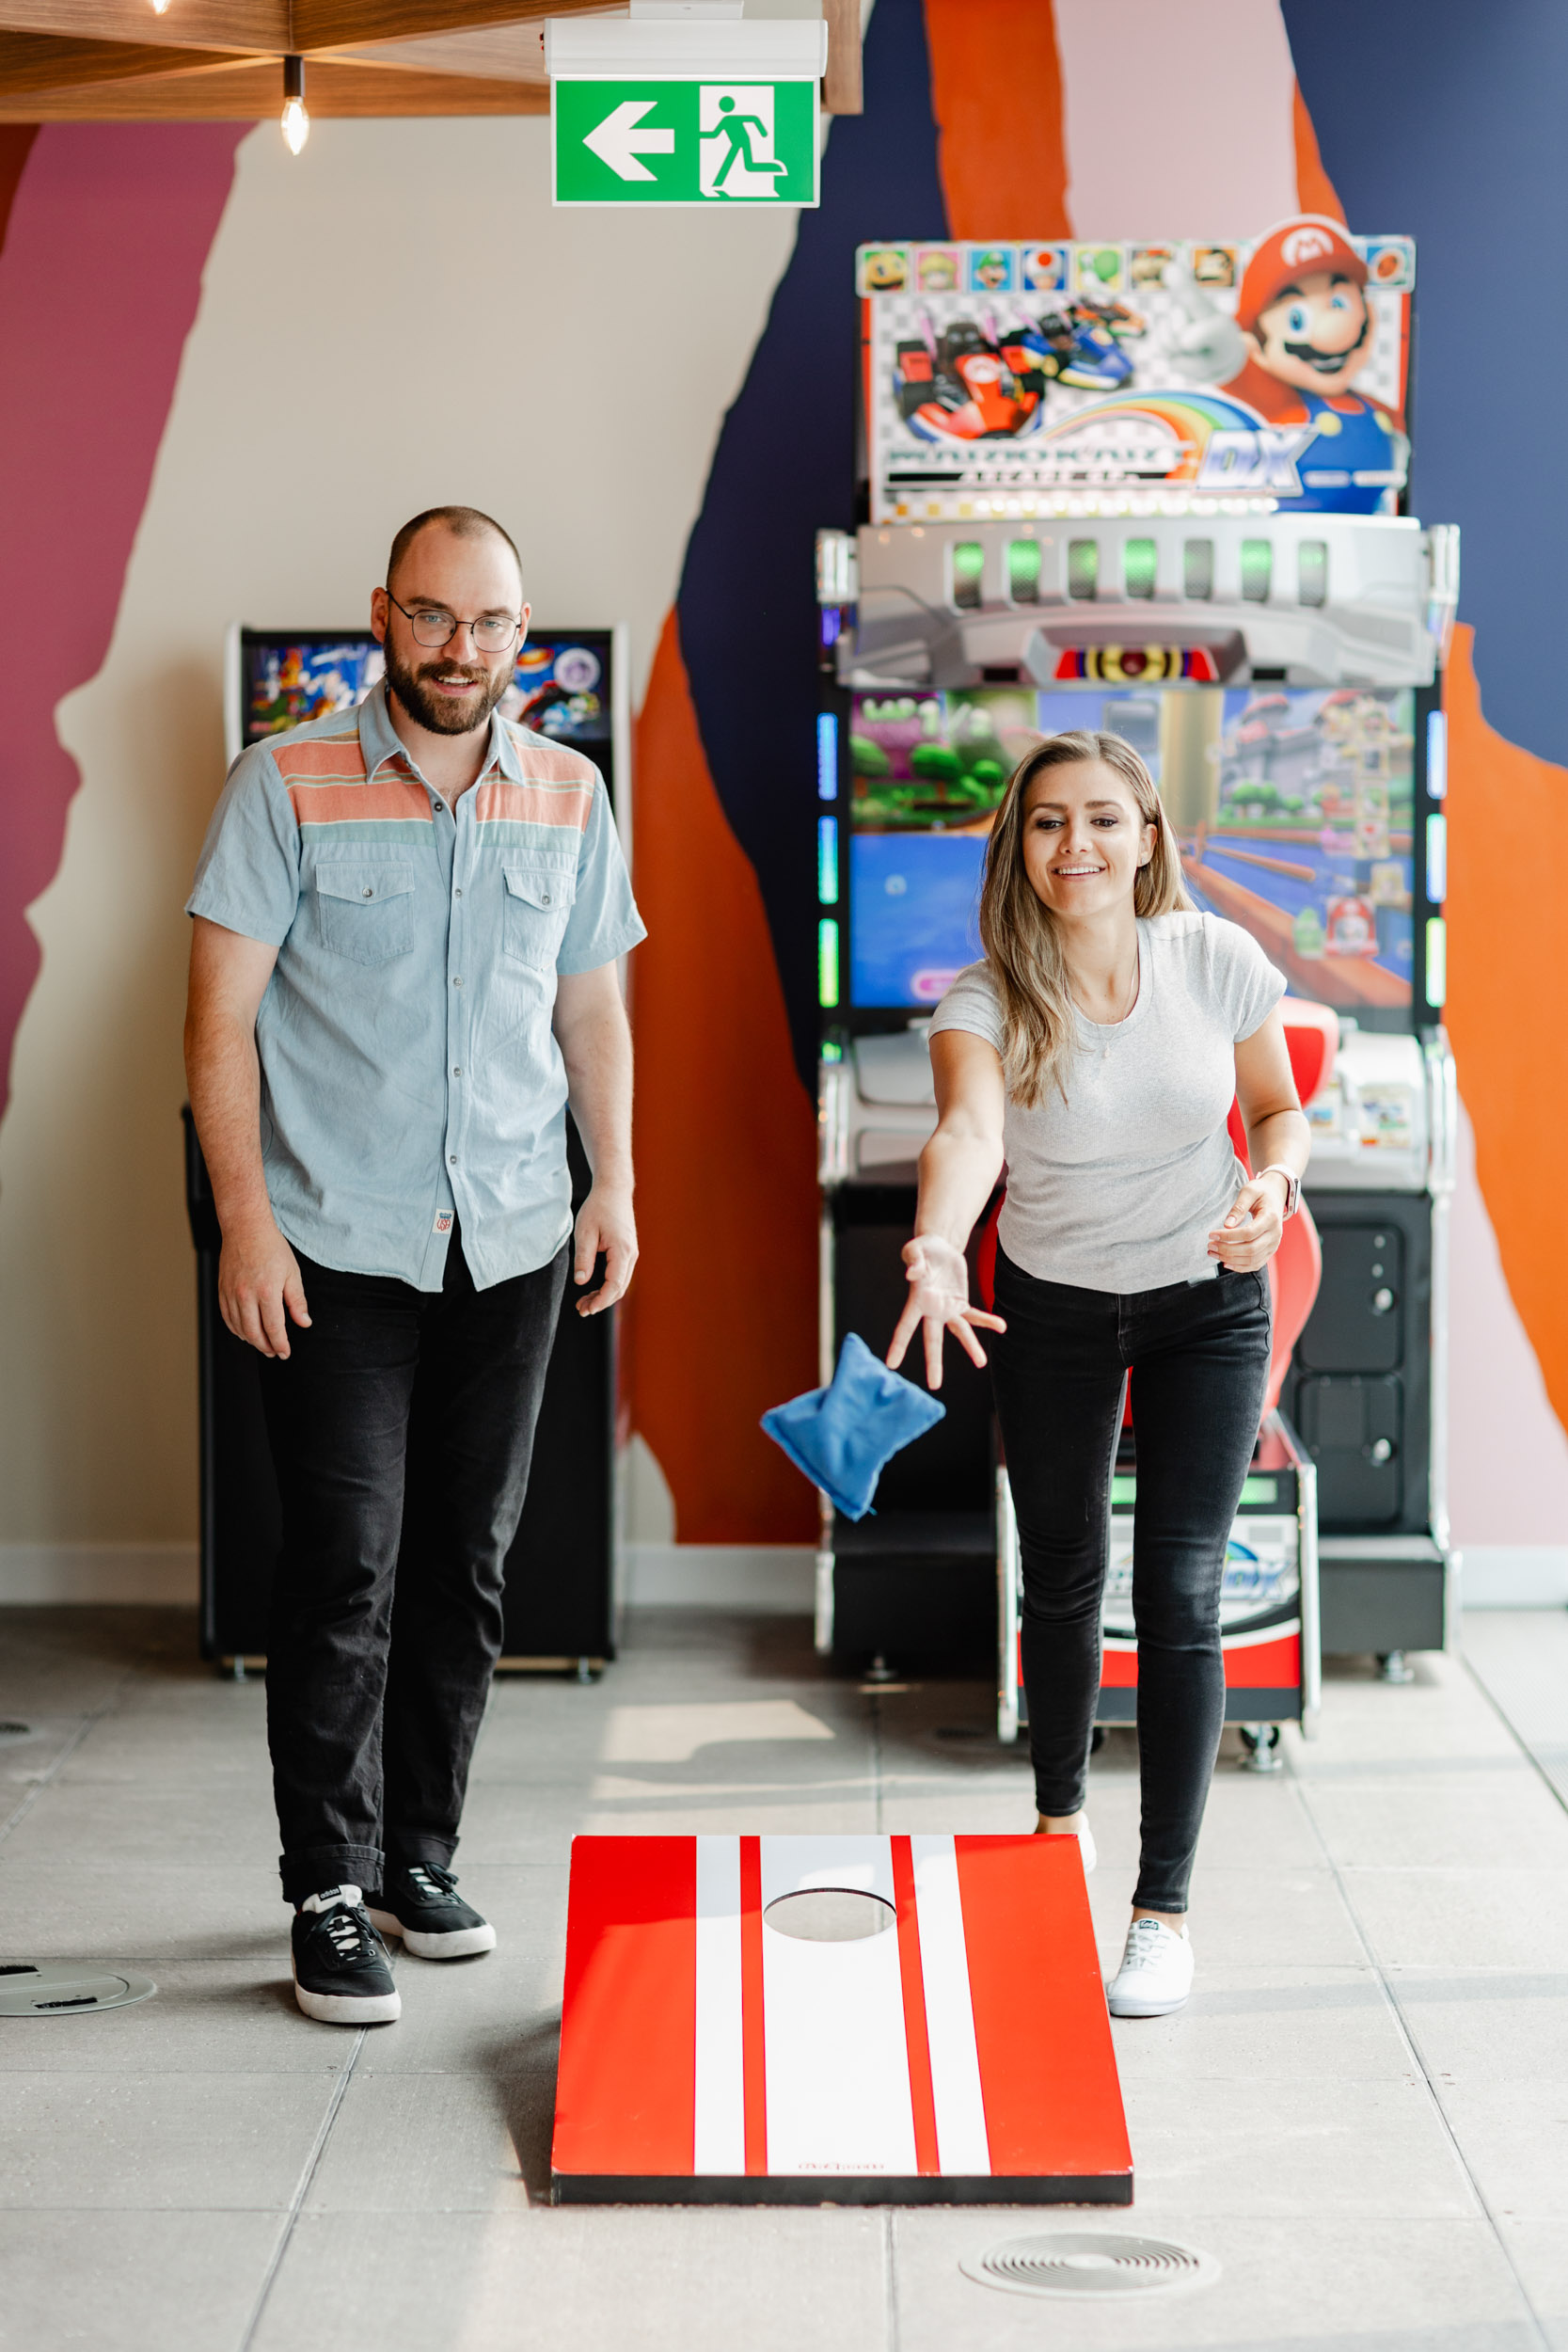 A couple playing a game of cornhole as part of an Index Exchange event.